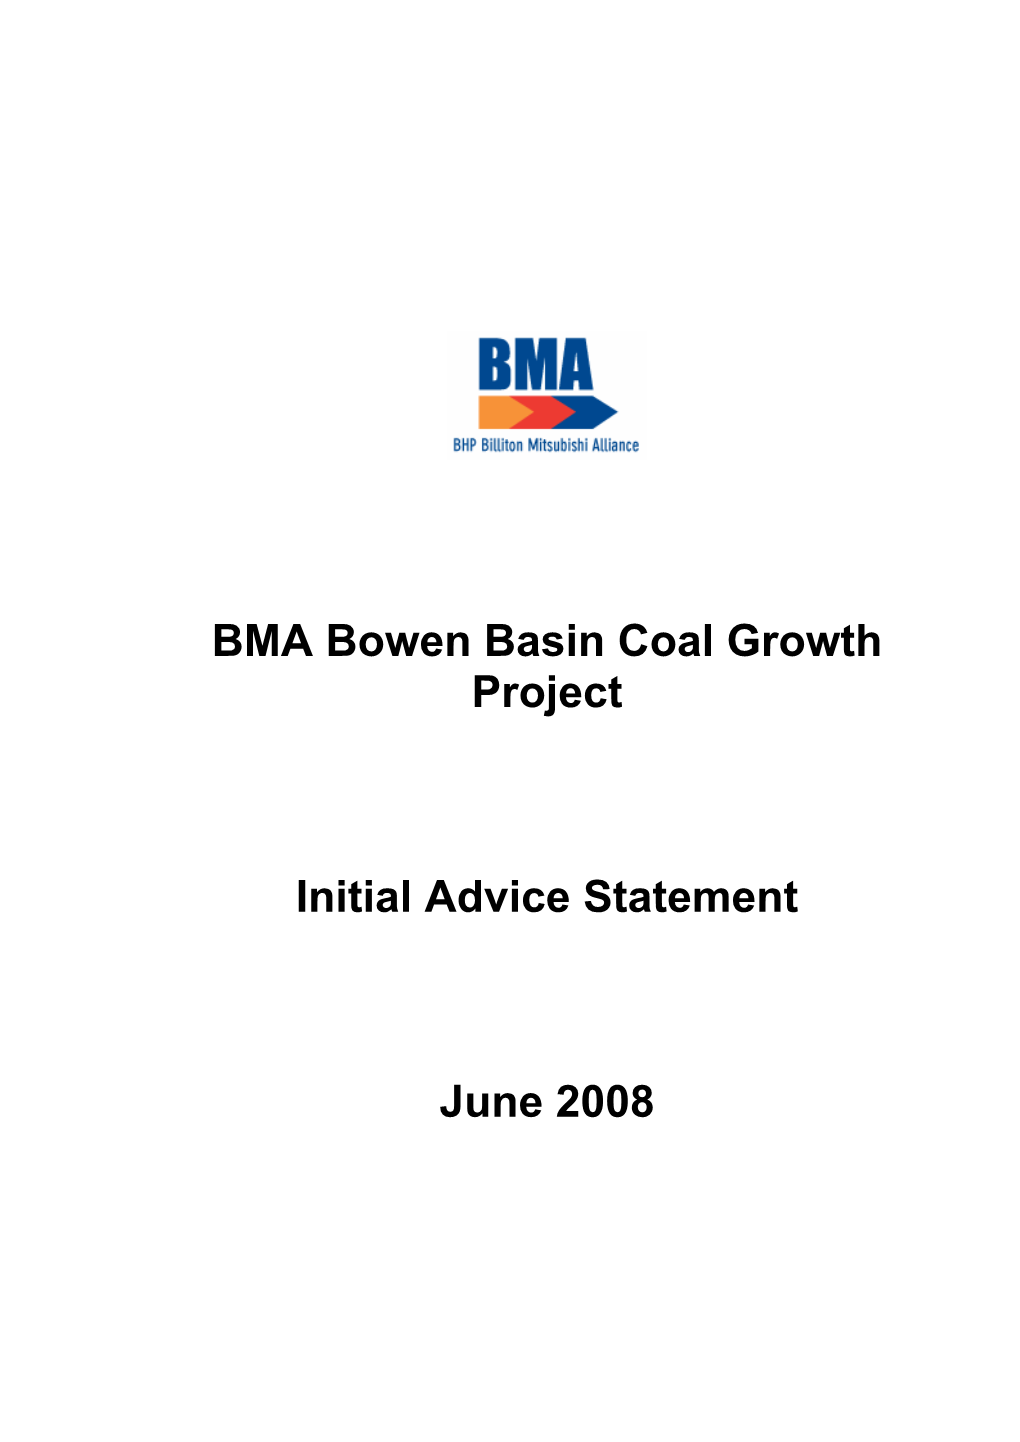 BMA Bowen Basin Coal Growth Project Initial Advice Statement June 2008